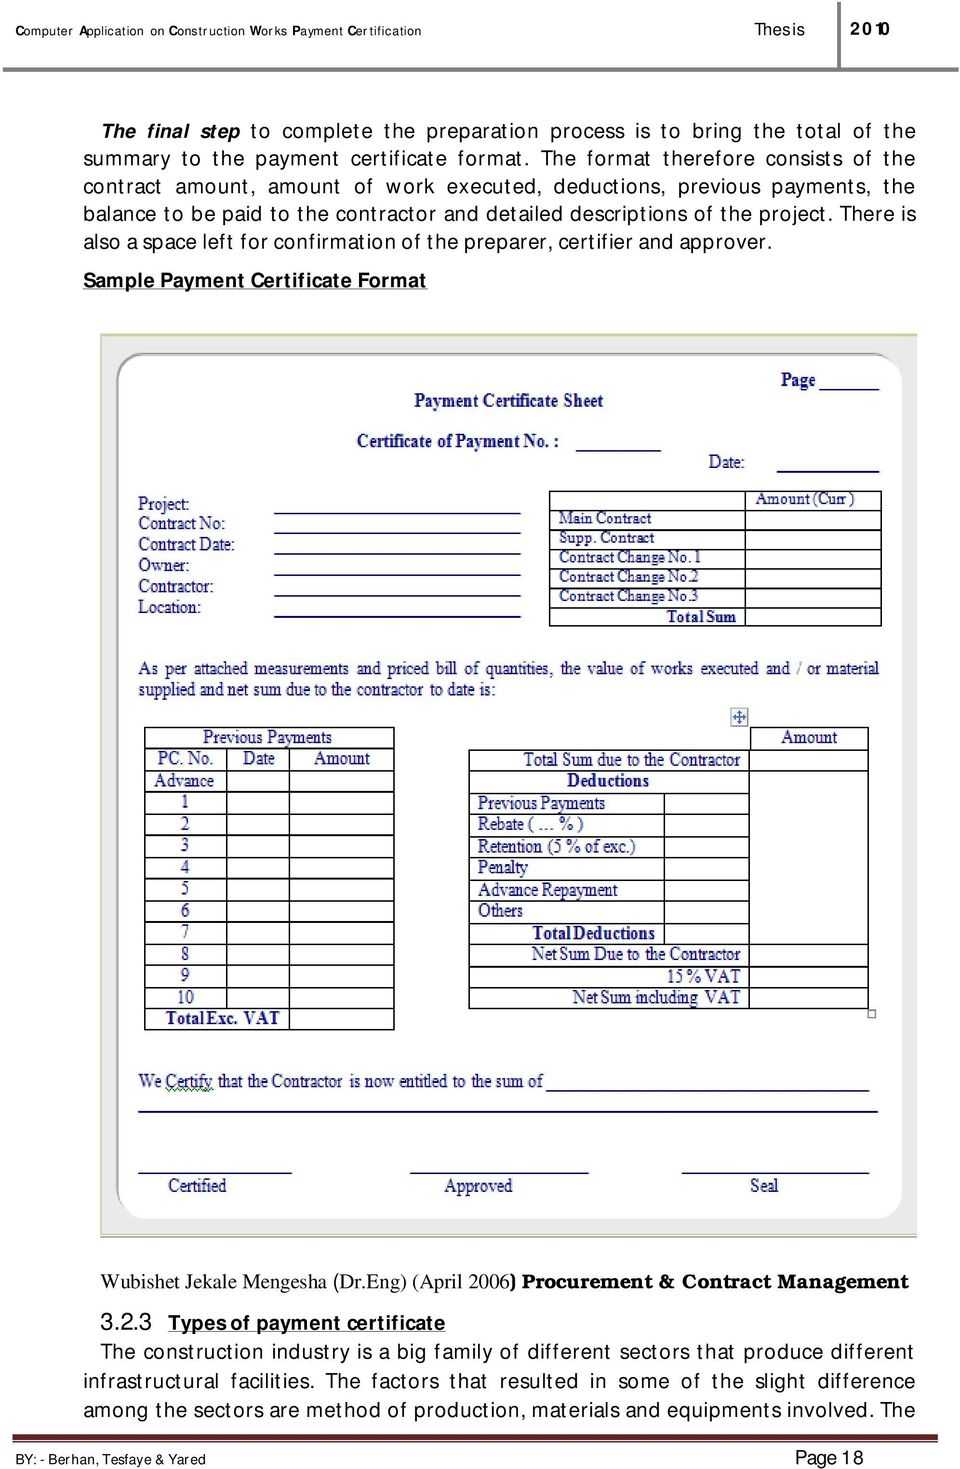 Computer Application On Construction Works Payment Inside Construction Payment Certificate Template